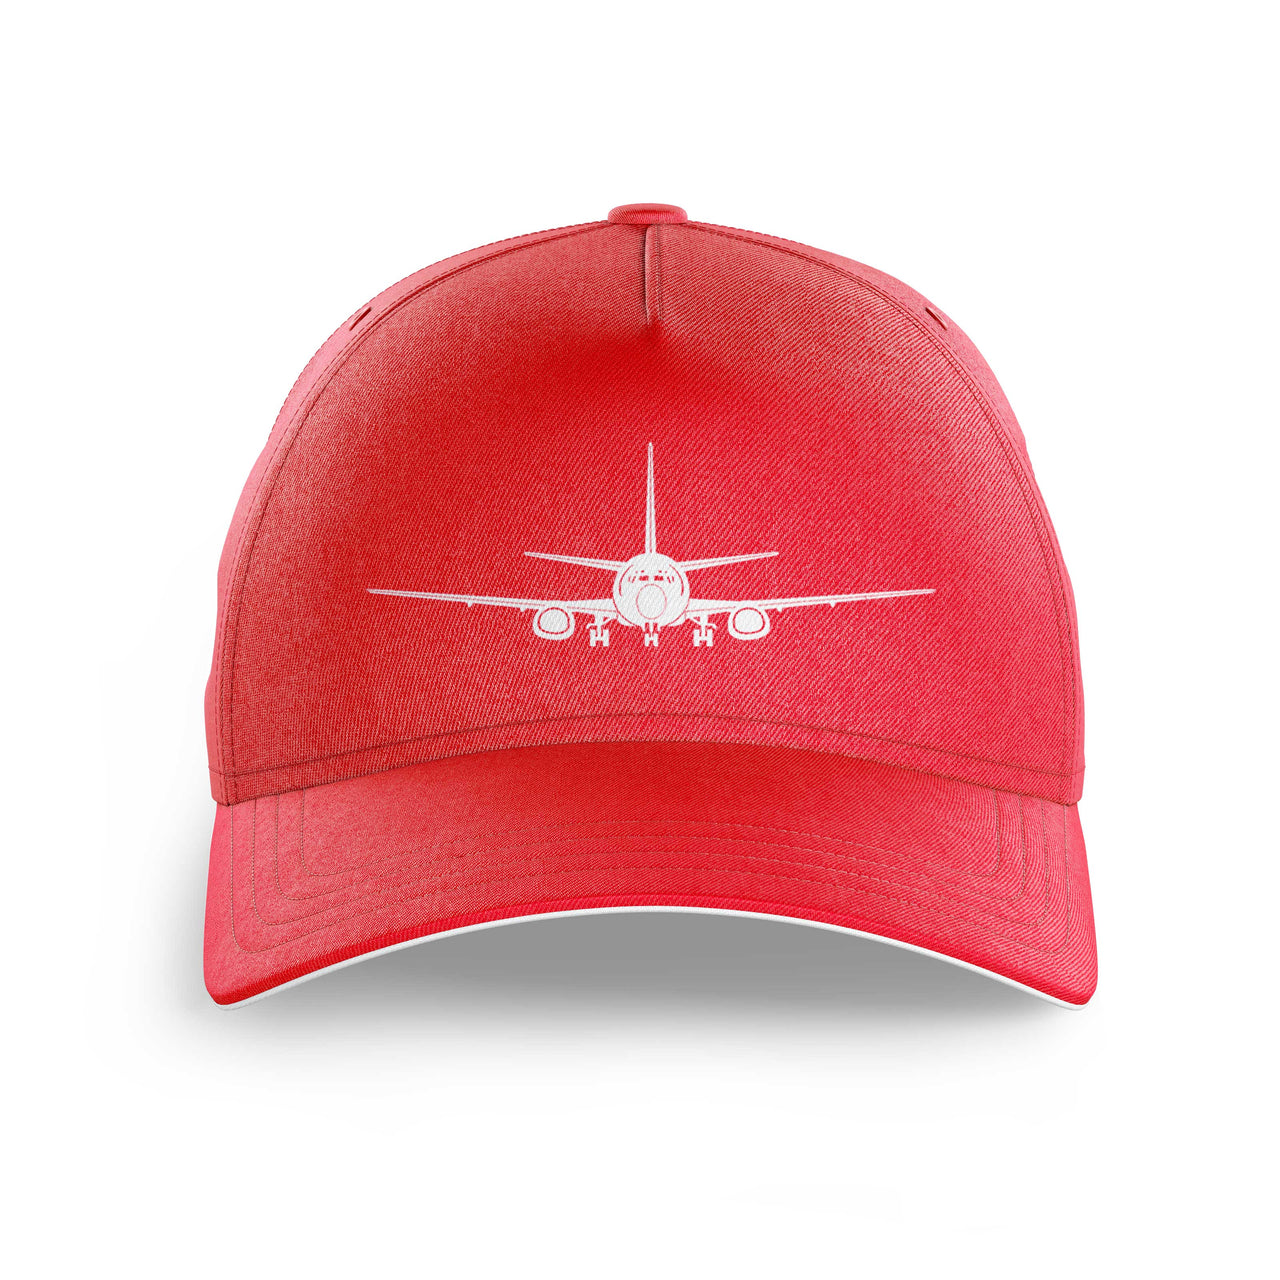 Boeing 737 Silhouette Printed Hats